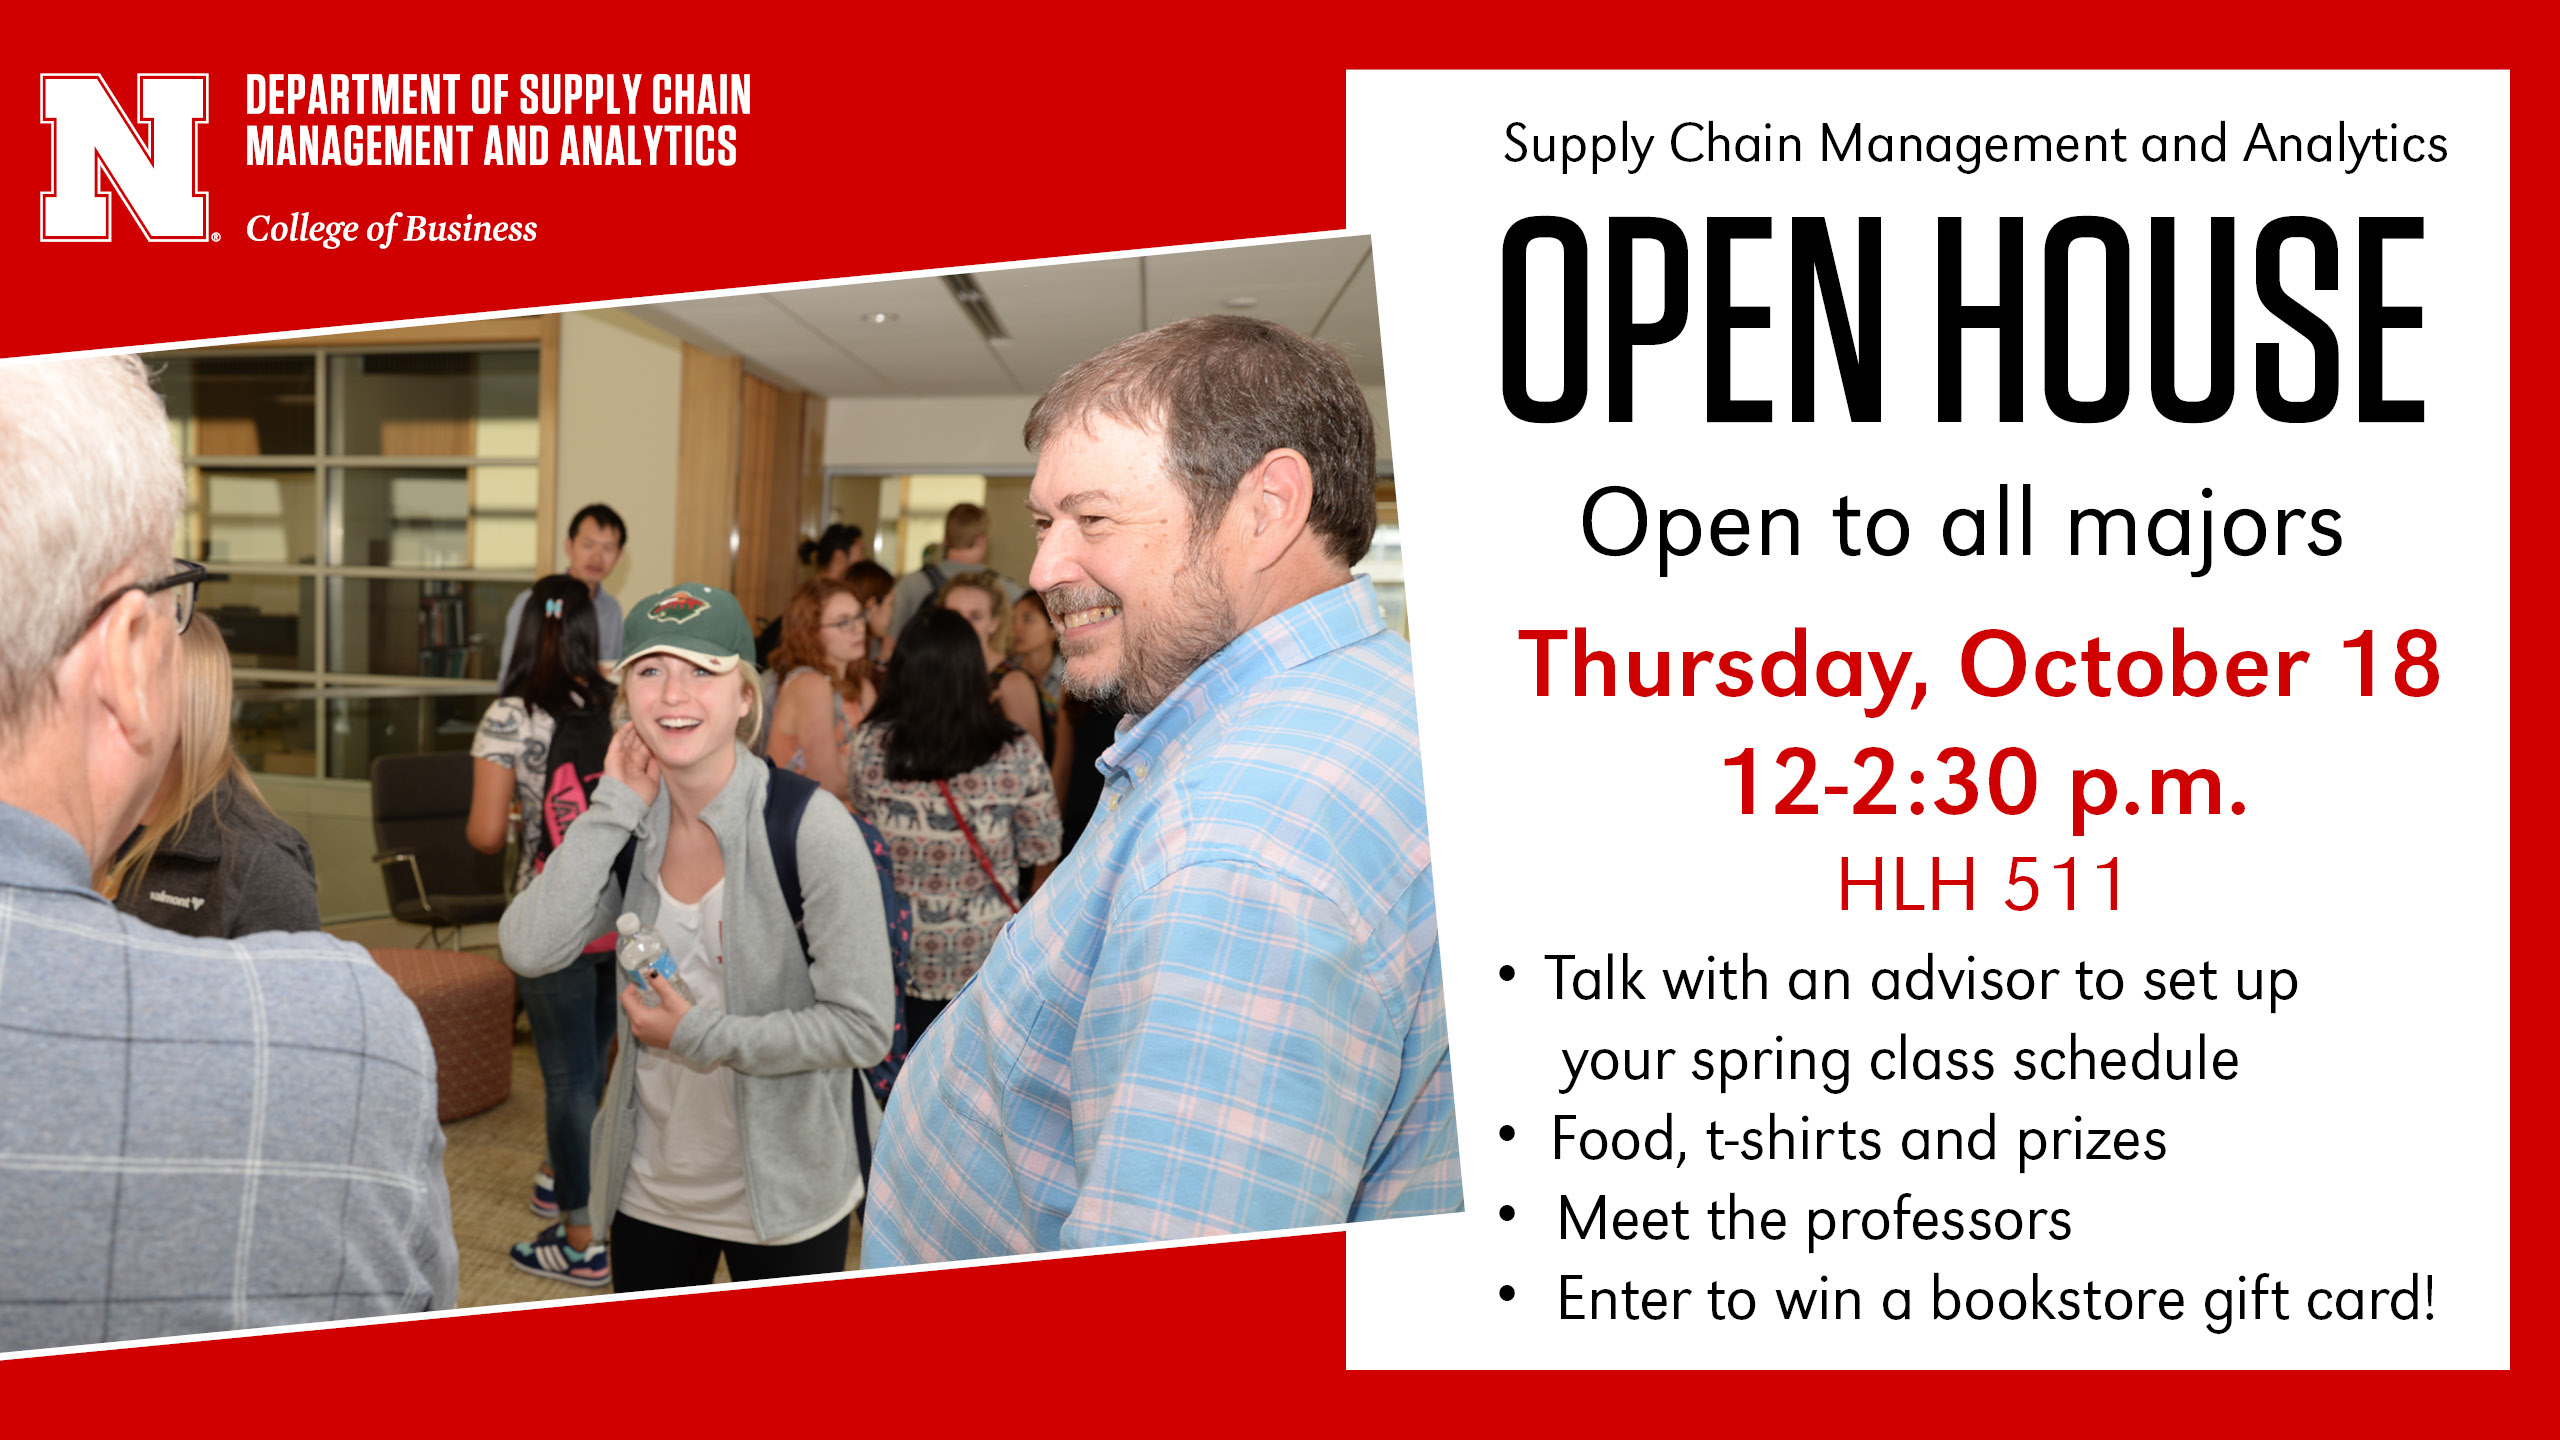 Supply Chain Management and Analytics Open House